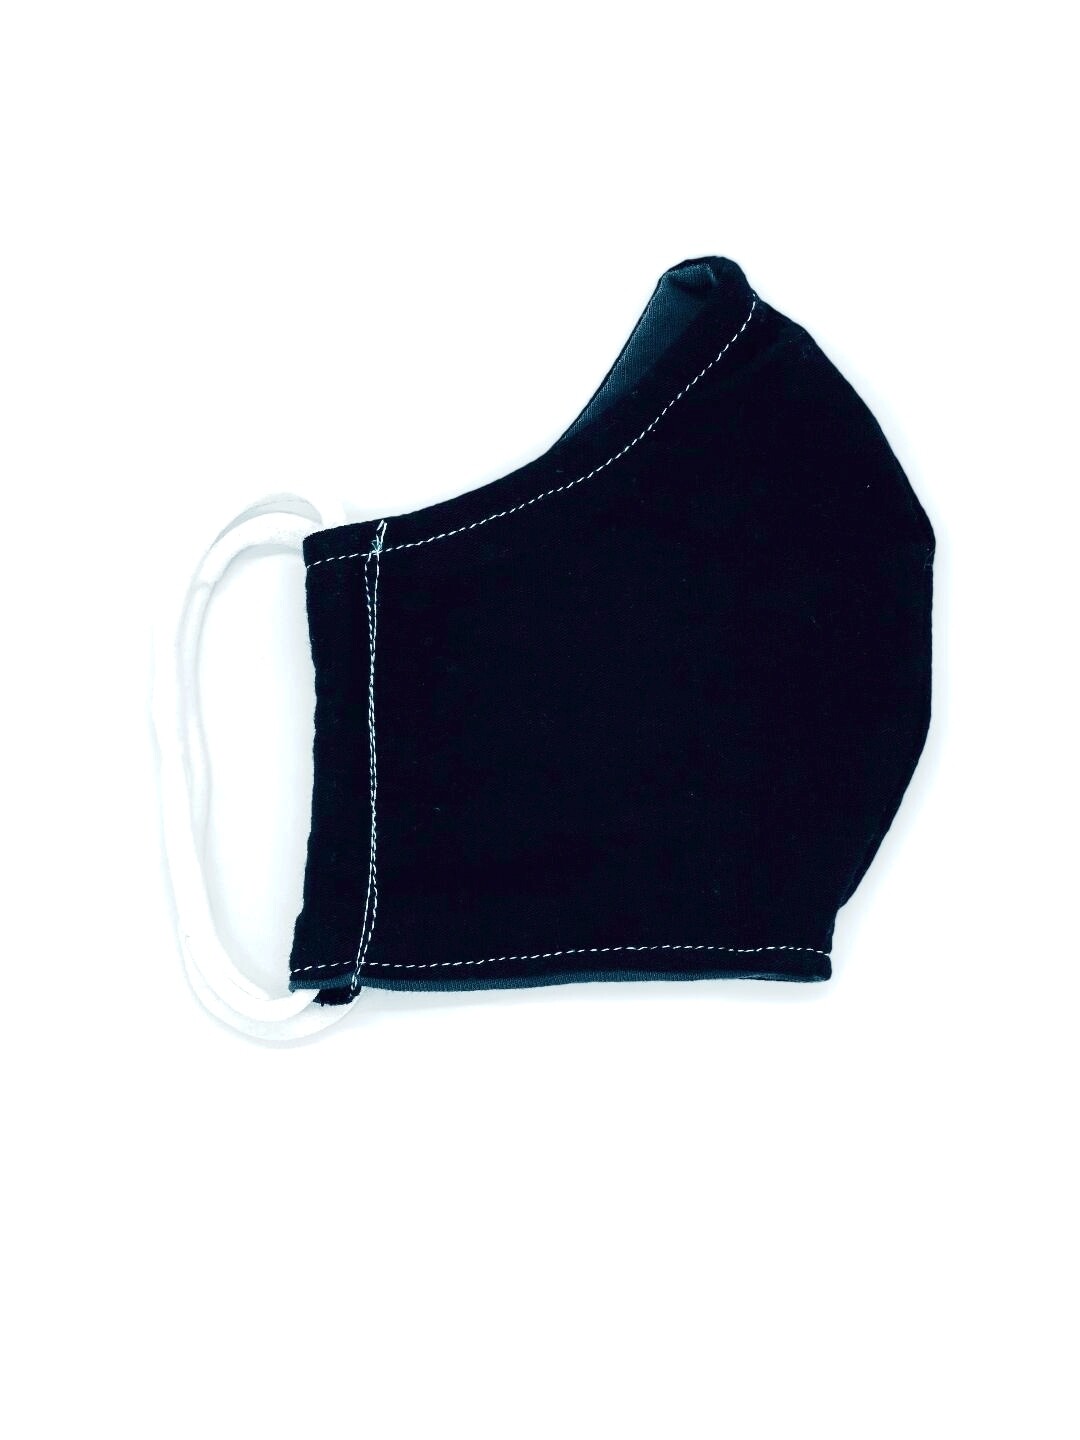 YOUTH COTTON FACE MASK-BLACK (This fabric is NOT antimicrobial material.)